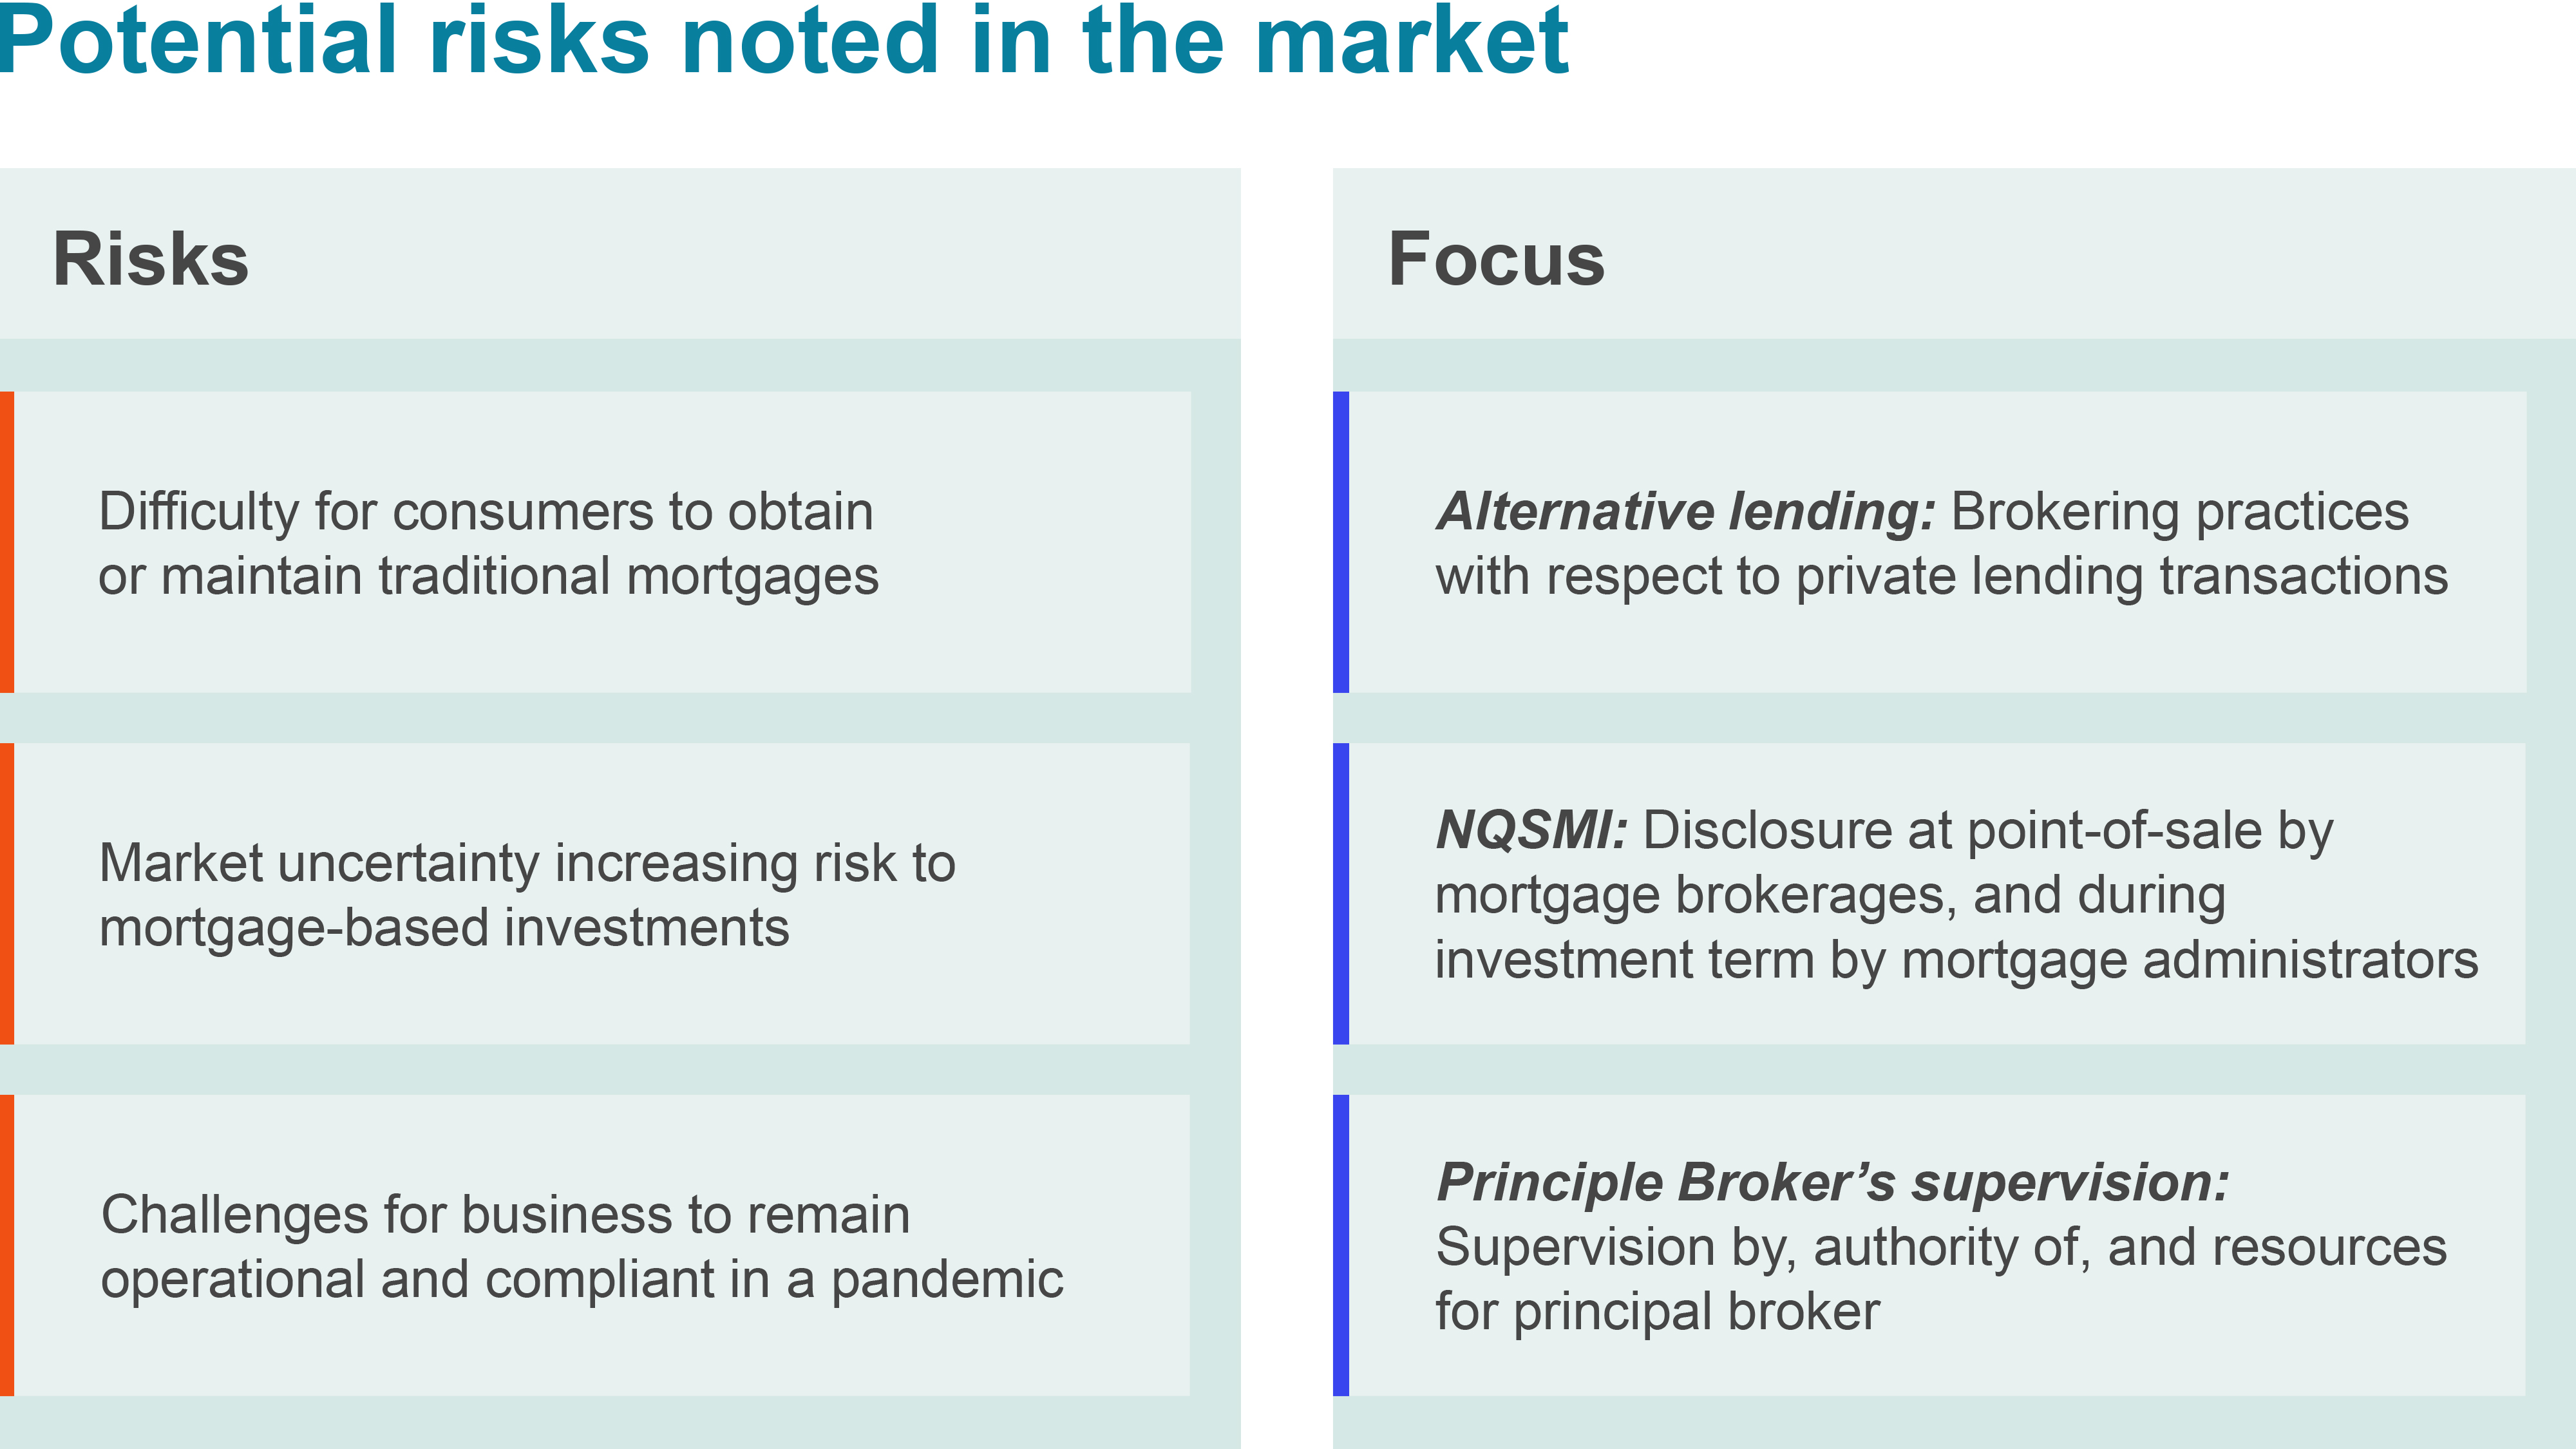 Potential risks in the market